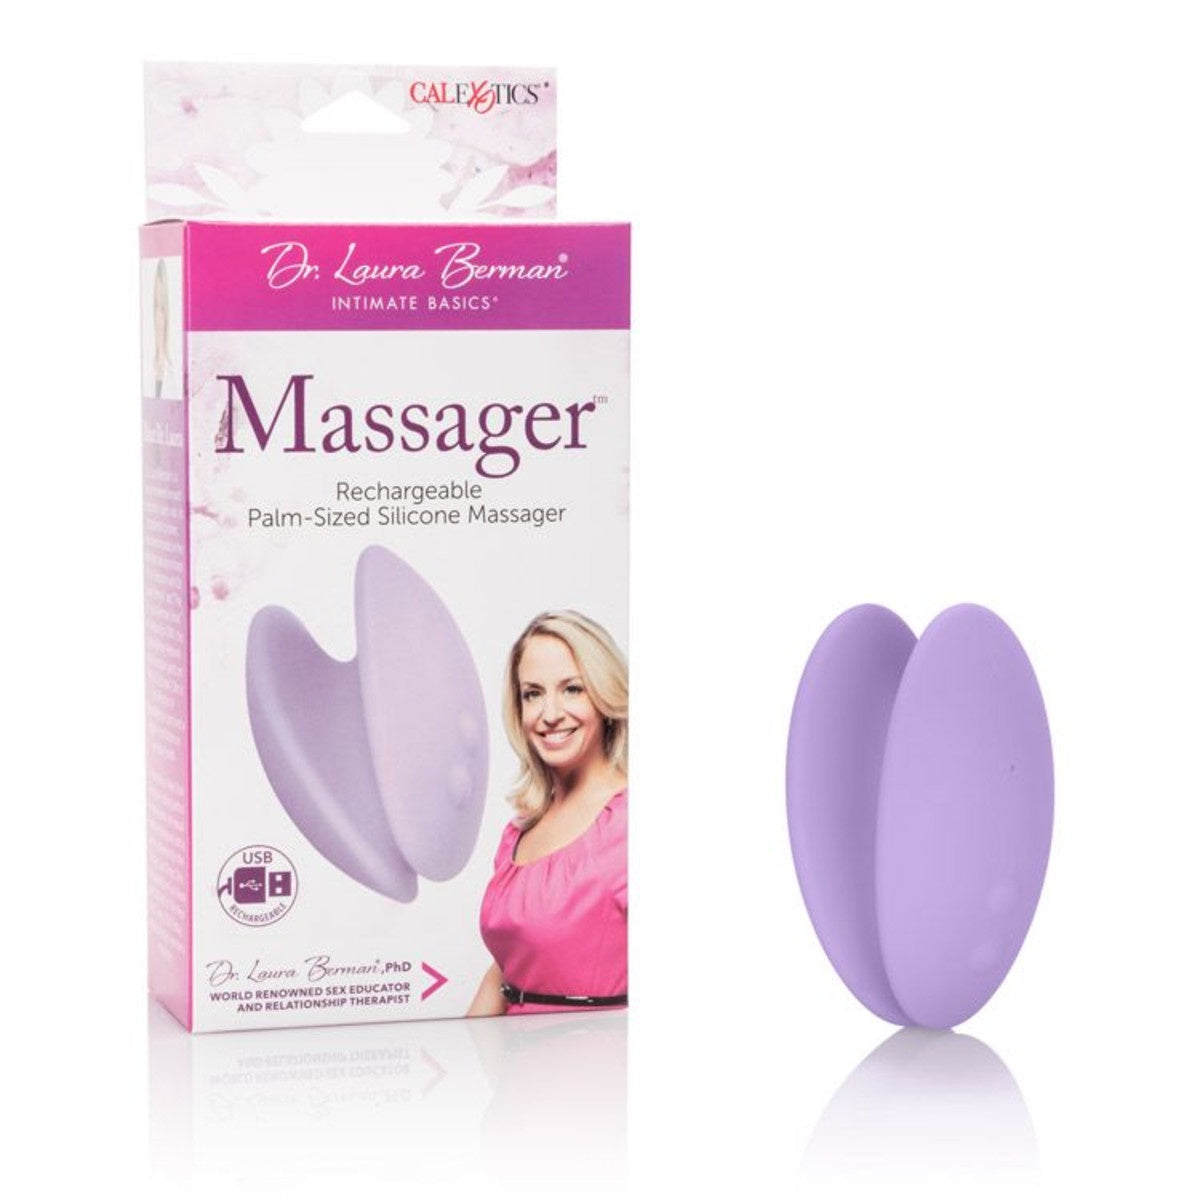 Dr Laura Berman Massager Palm-Sized Silicone Massager